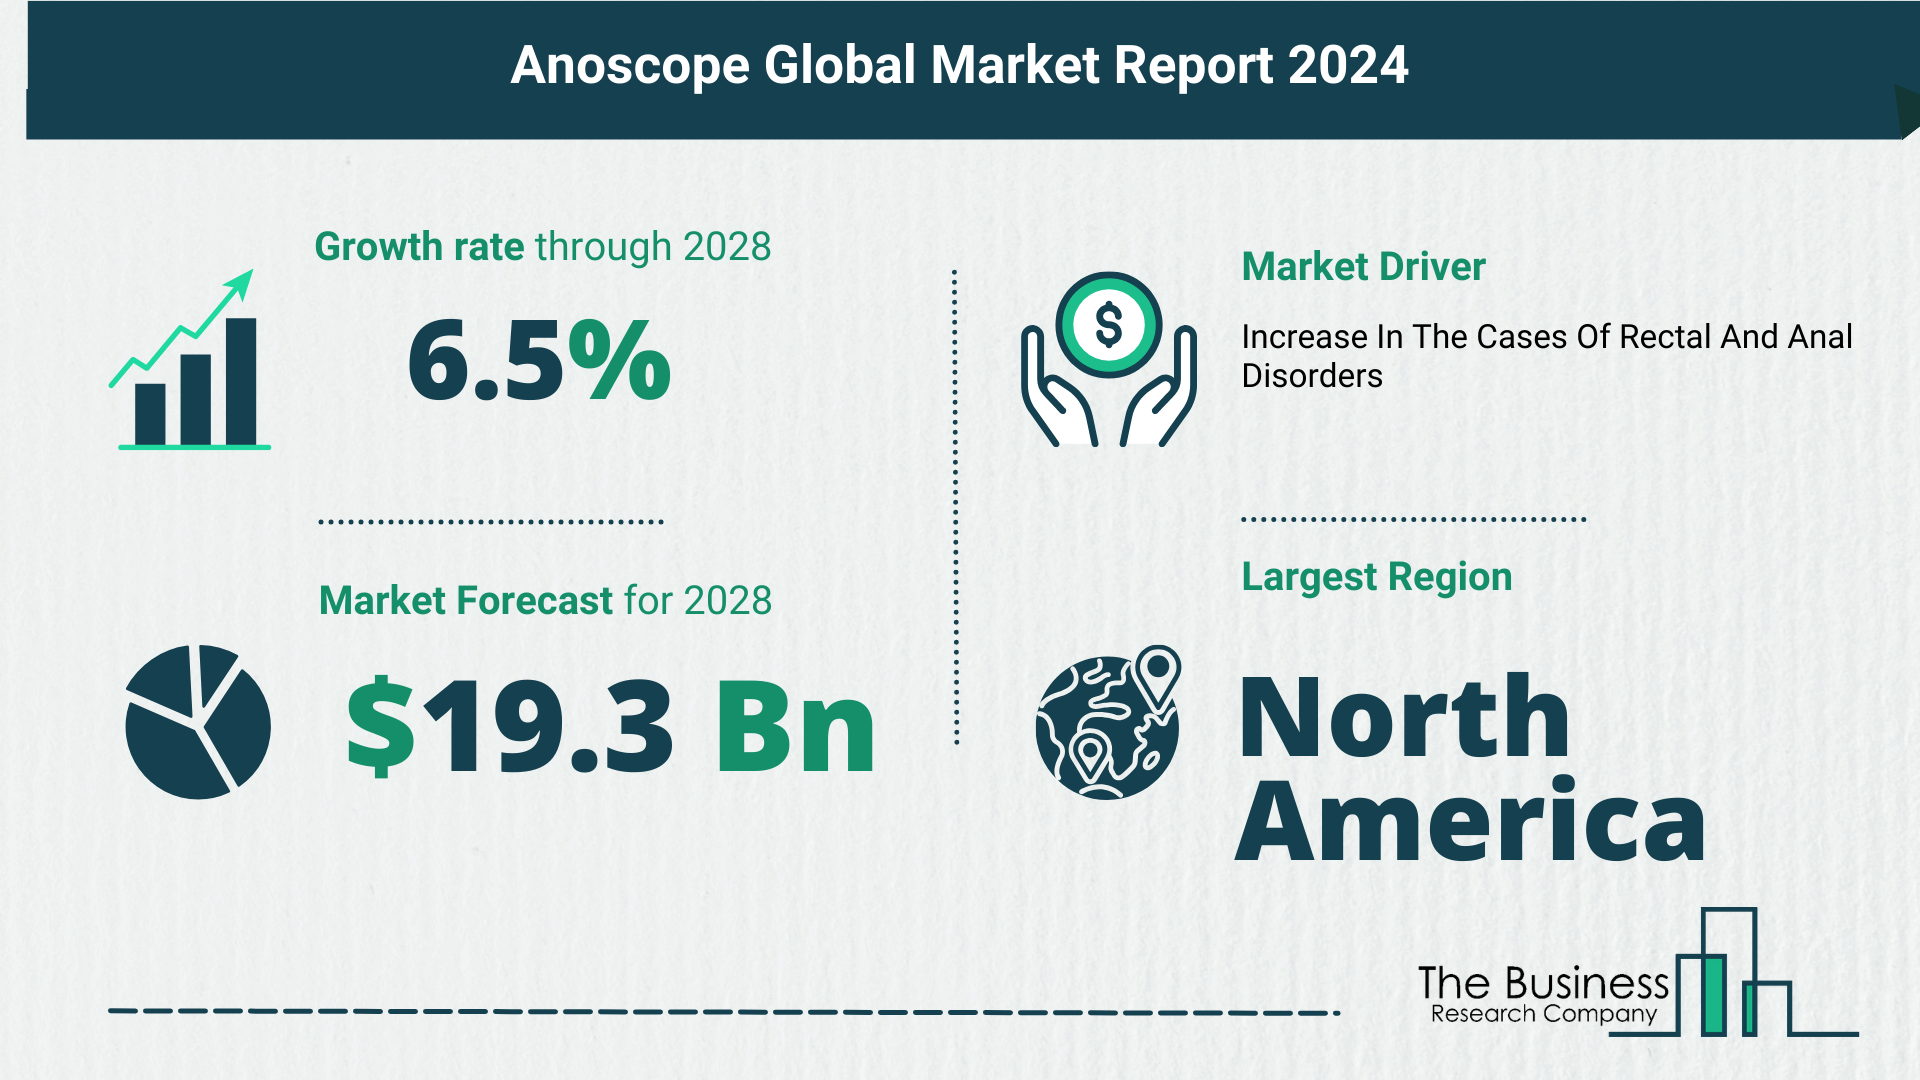 Key Trends And Drivers In The Anoscope Market 2024